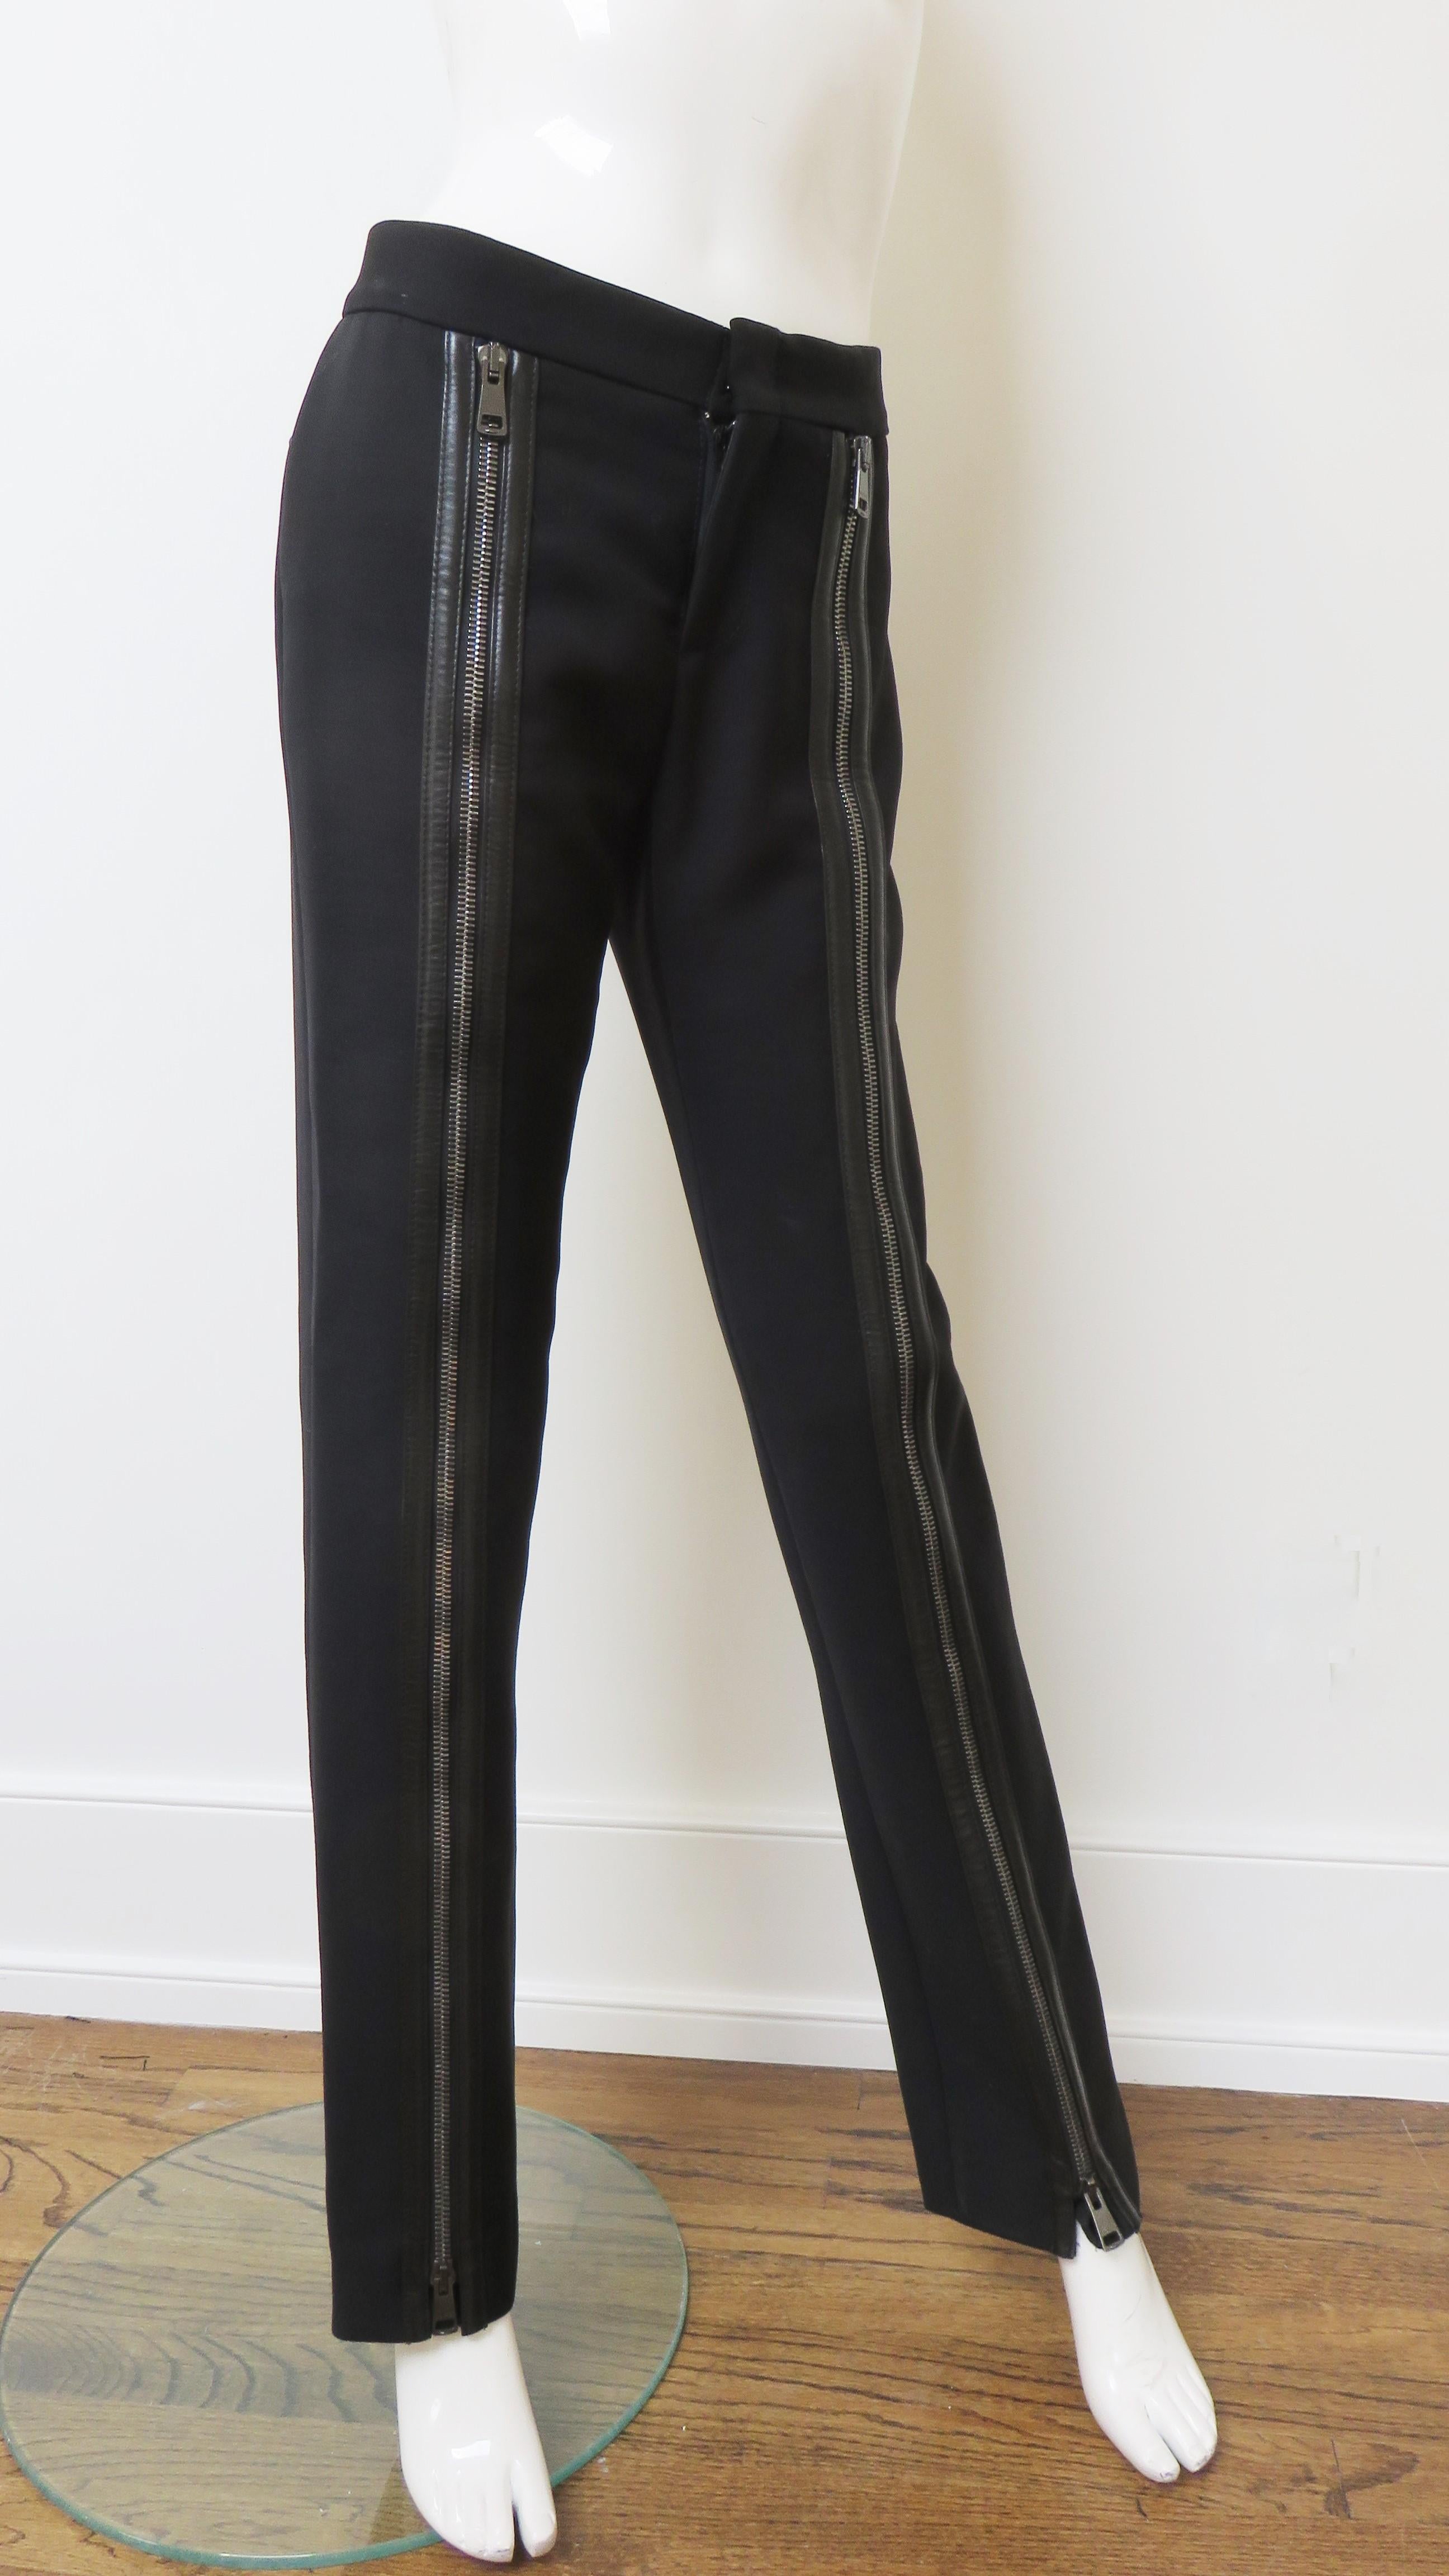 Tom Ford for Gucci Pants with Zipper Legs A/W 2001 For Sale 3